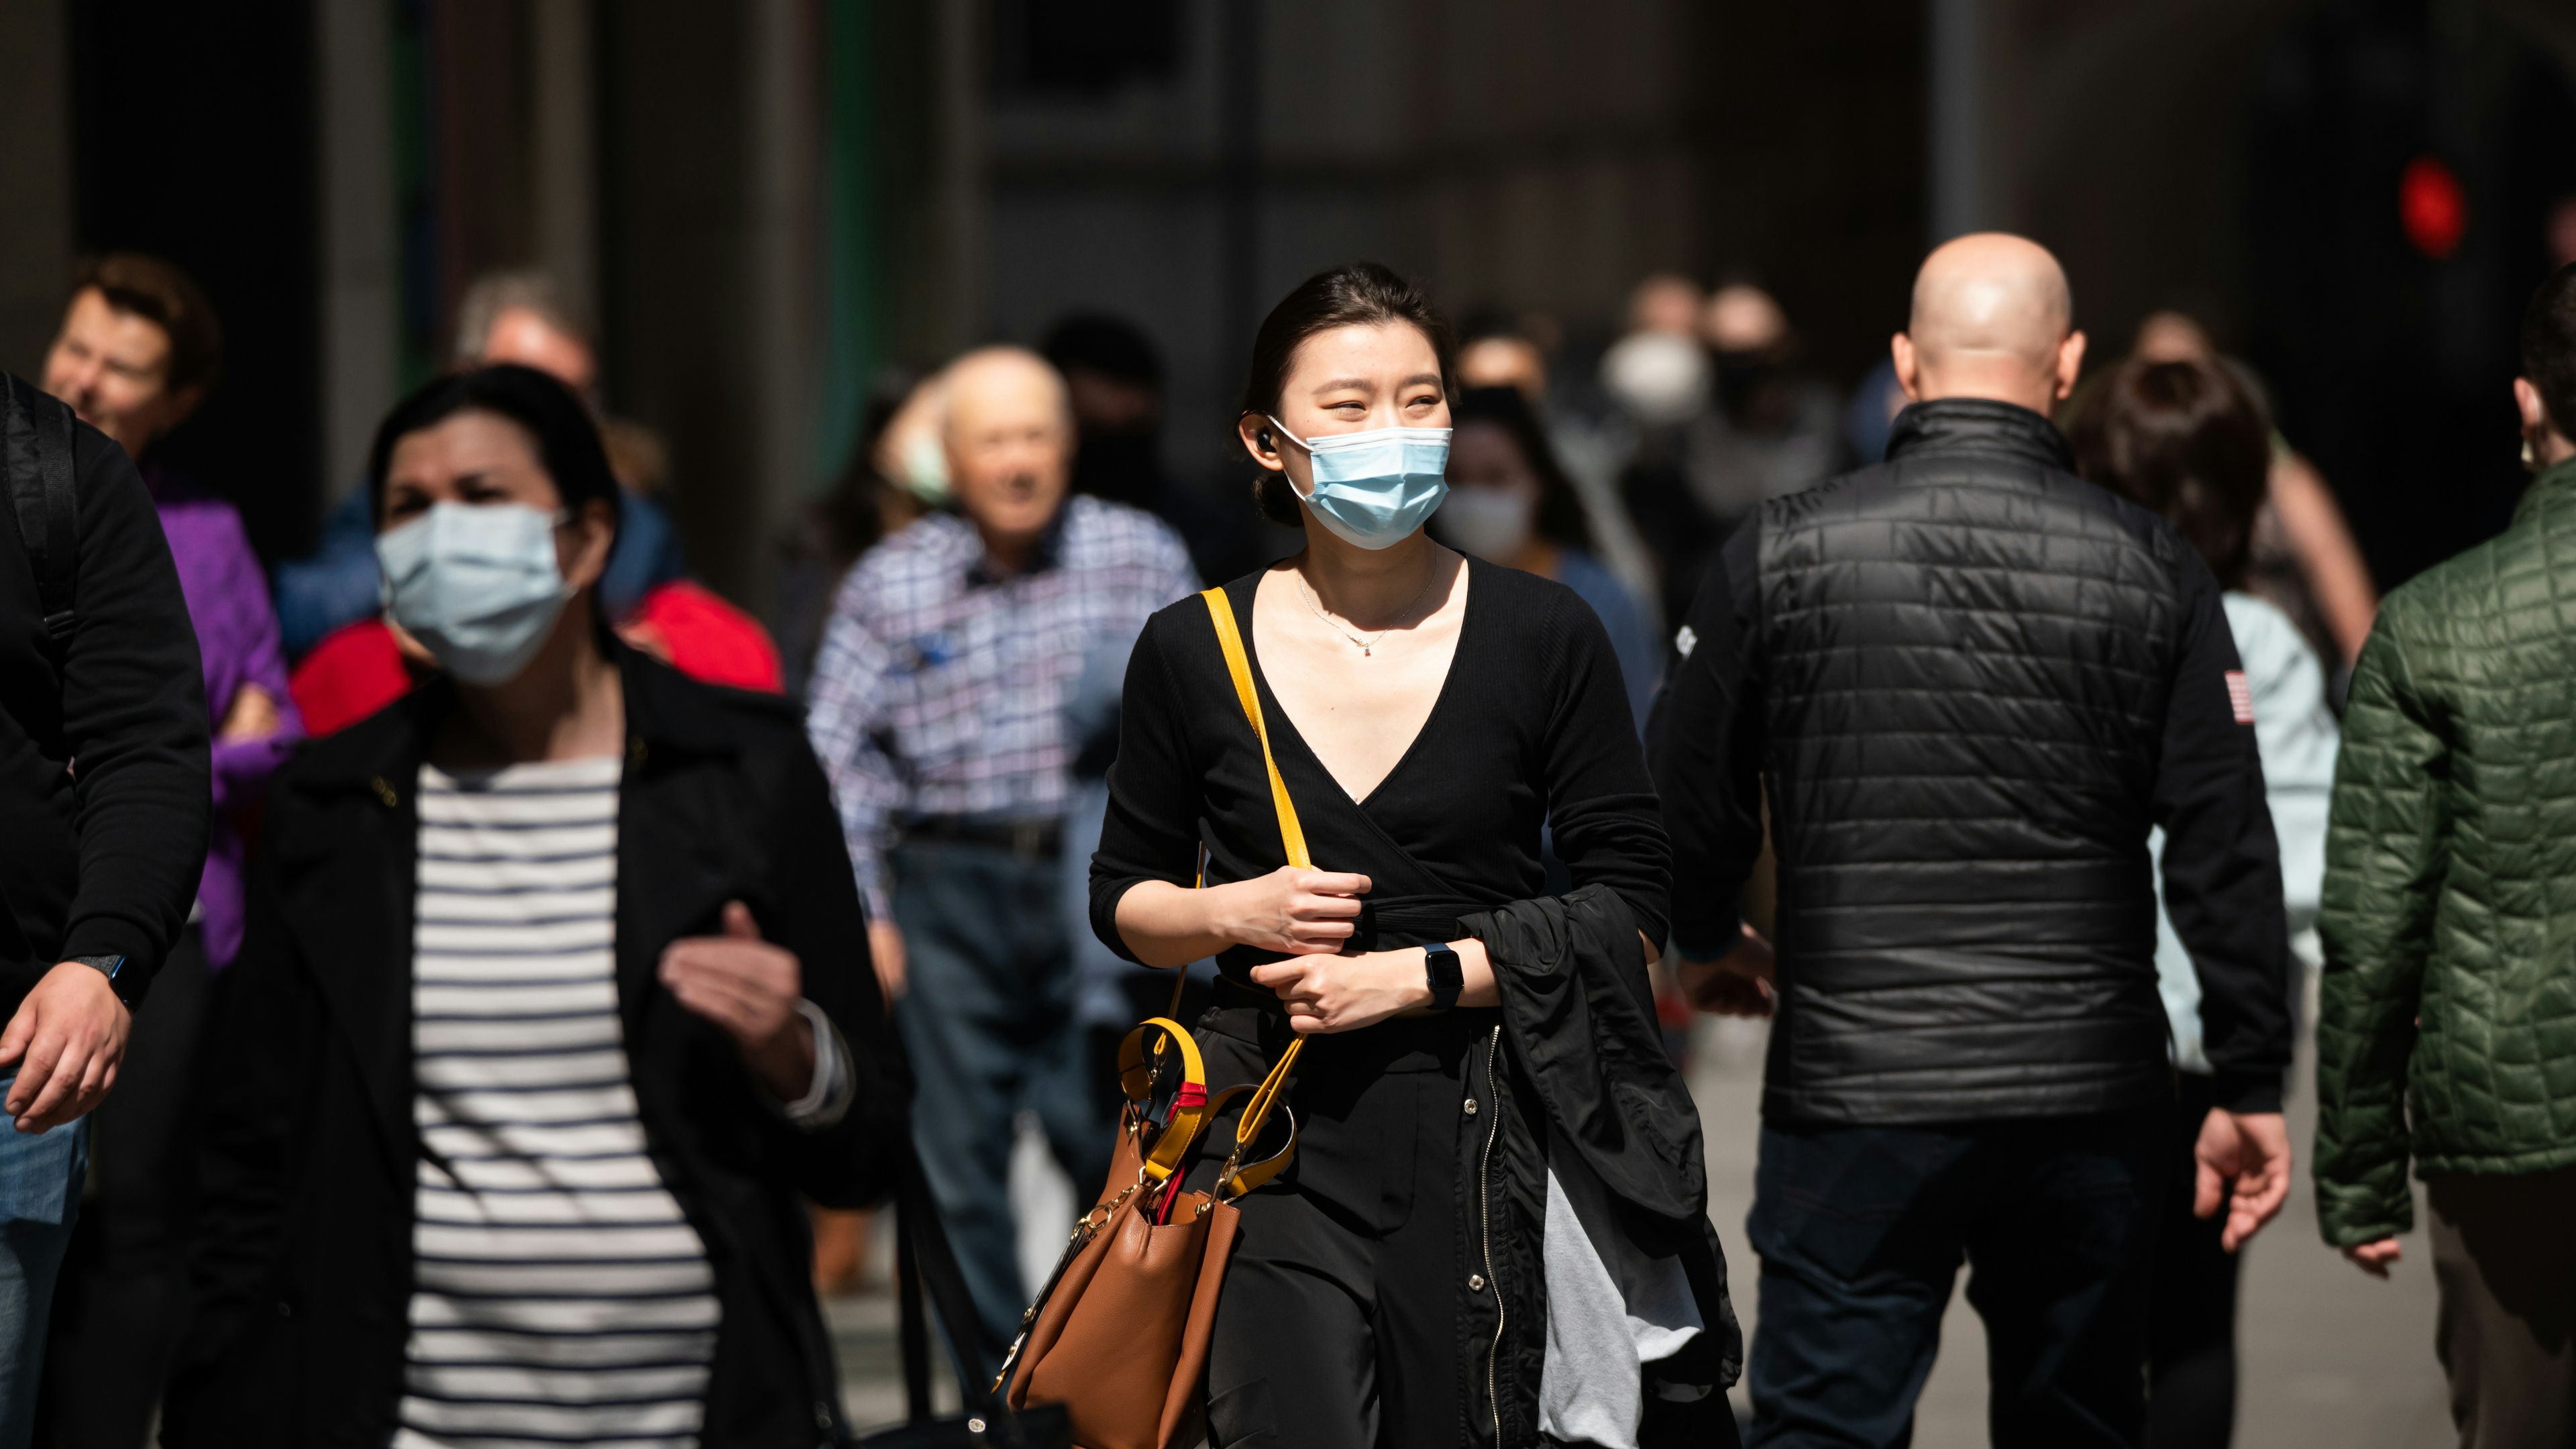 People wear face masks while walking in New York City.